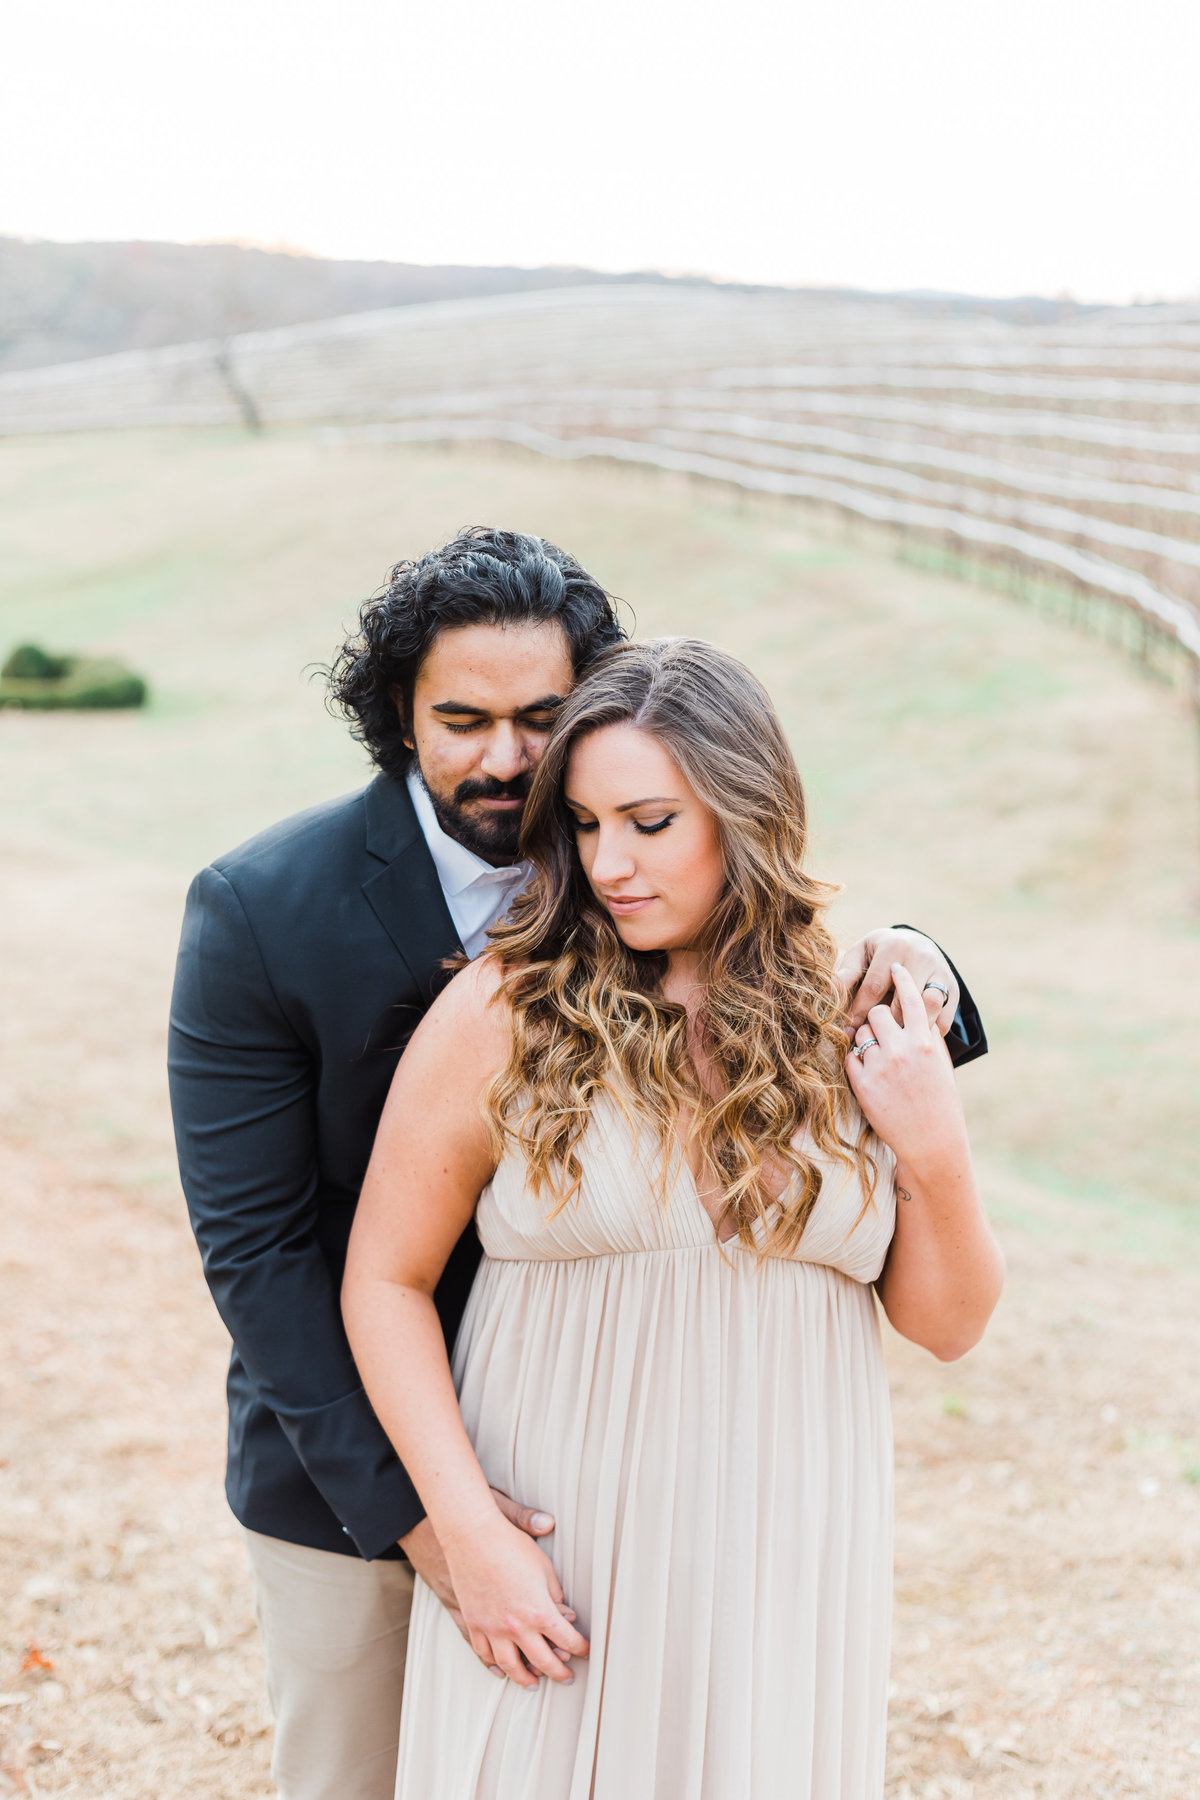 Motaluce Winery, Gainesville, GA Couple Engagement Anniversary Photography Session by Renee Jael-12